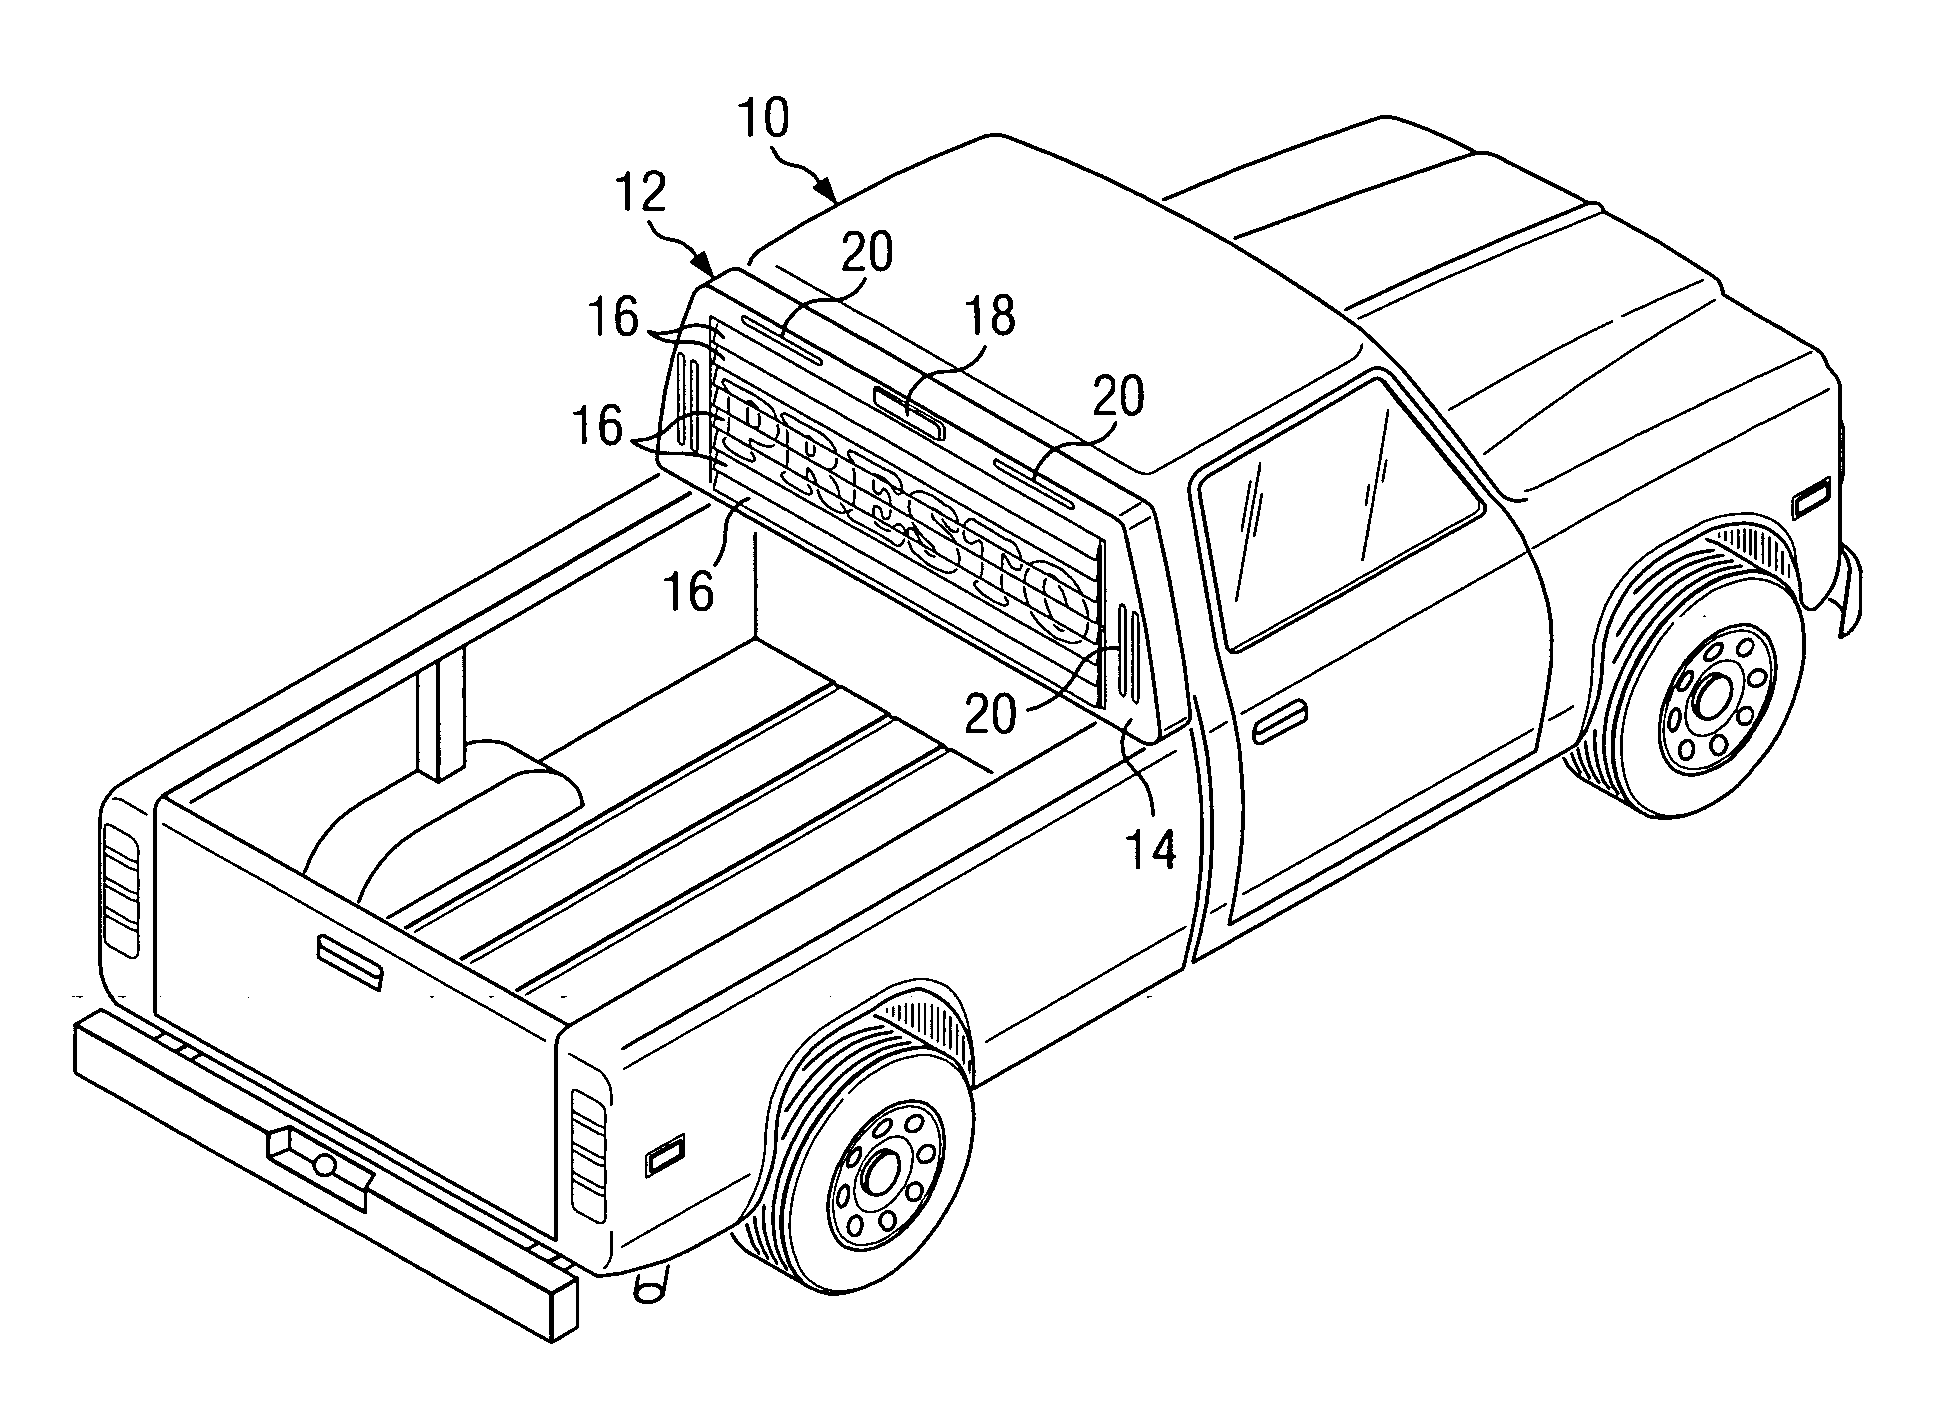 Sun screen and display system for pickup trucks and the like